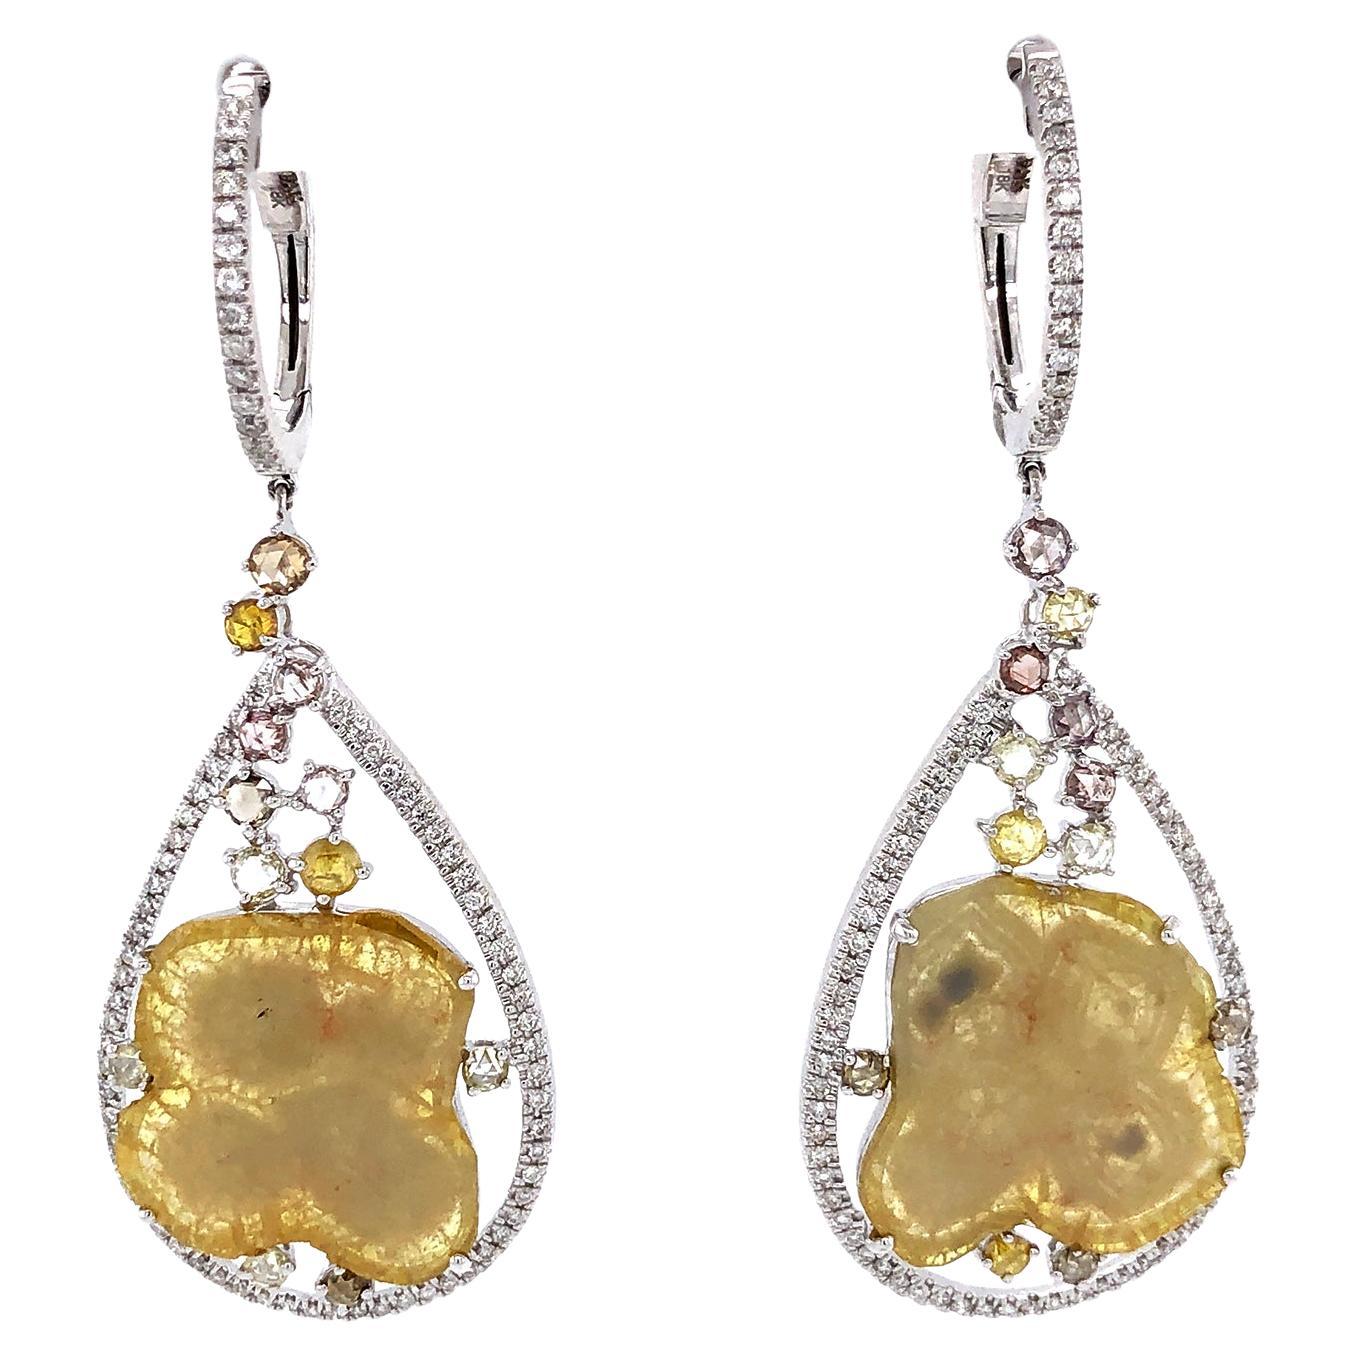 18k Gold Sliced Yellow Diamond Earring Caged In Pear Shaped Pave Diamond Setting For Sale